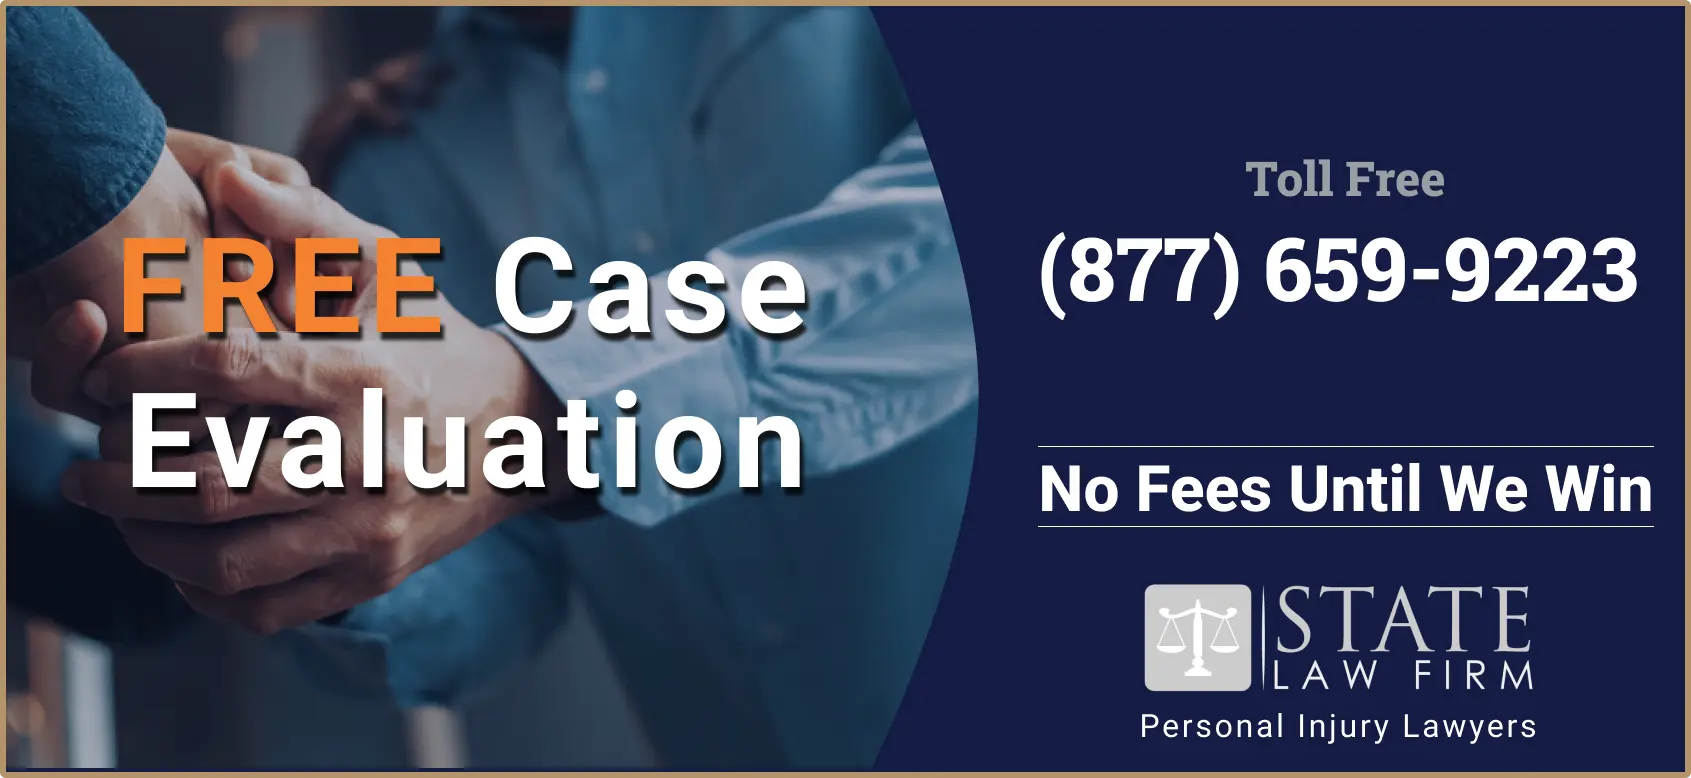 Electrocution accident lawyer in Bakersfield offering free consultation